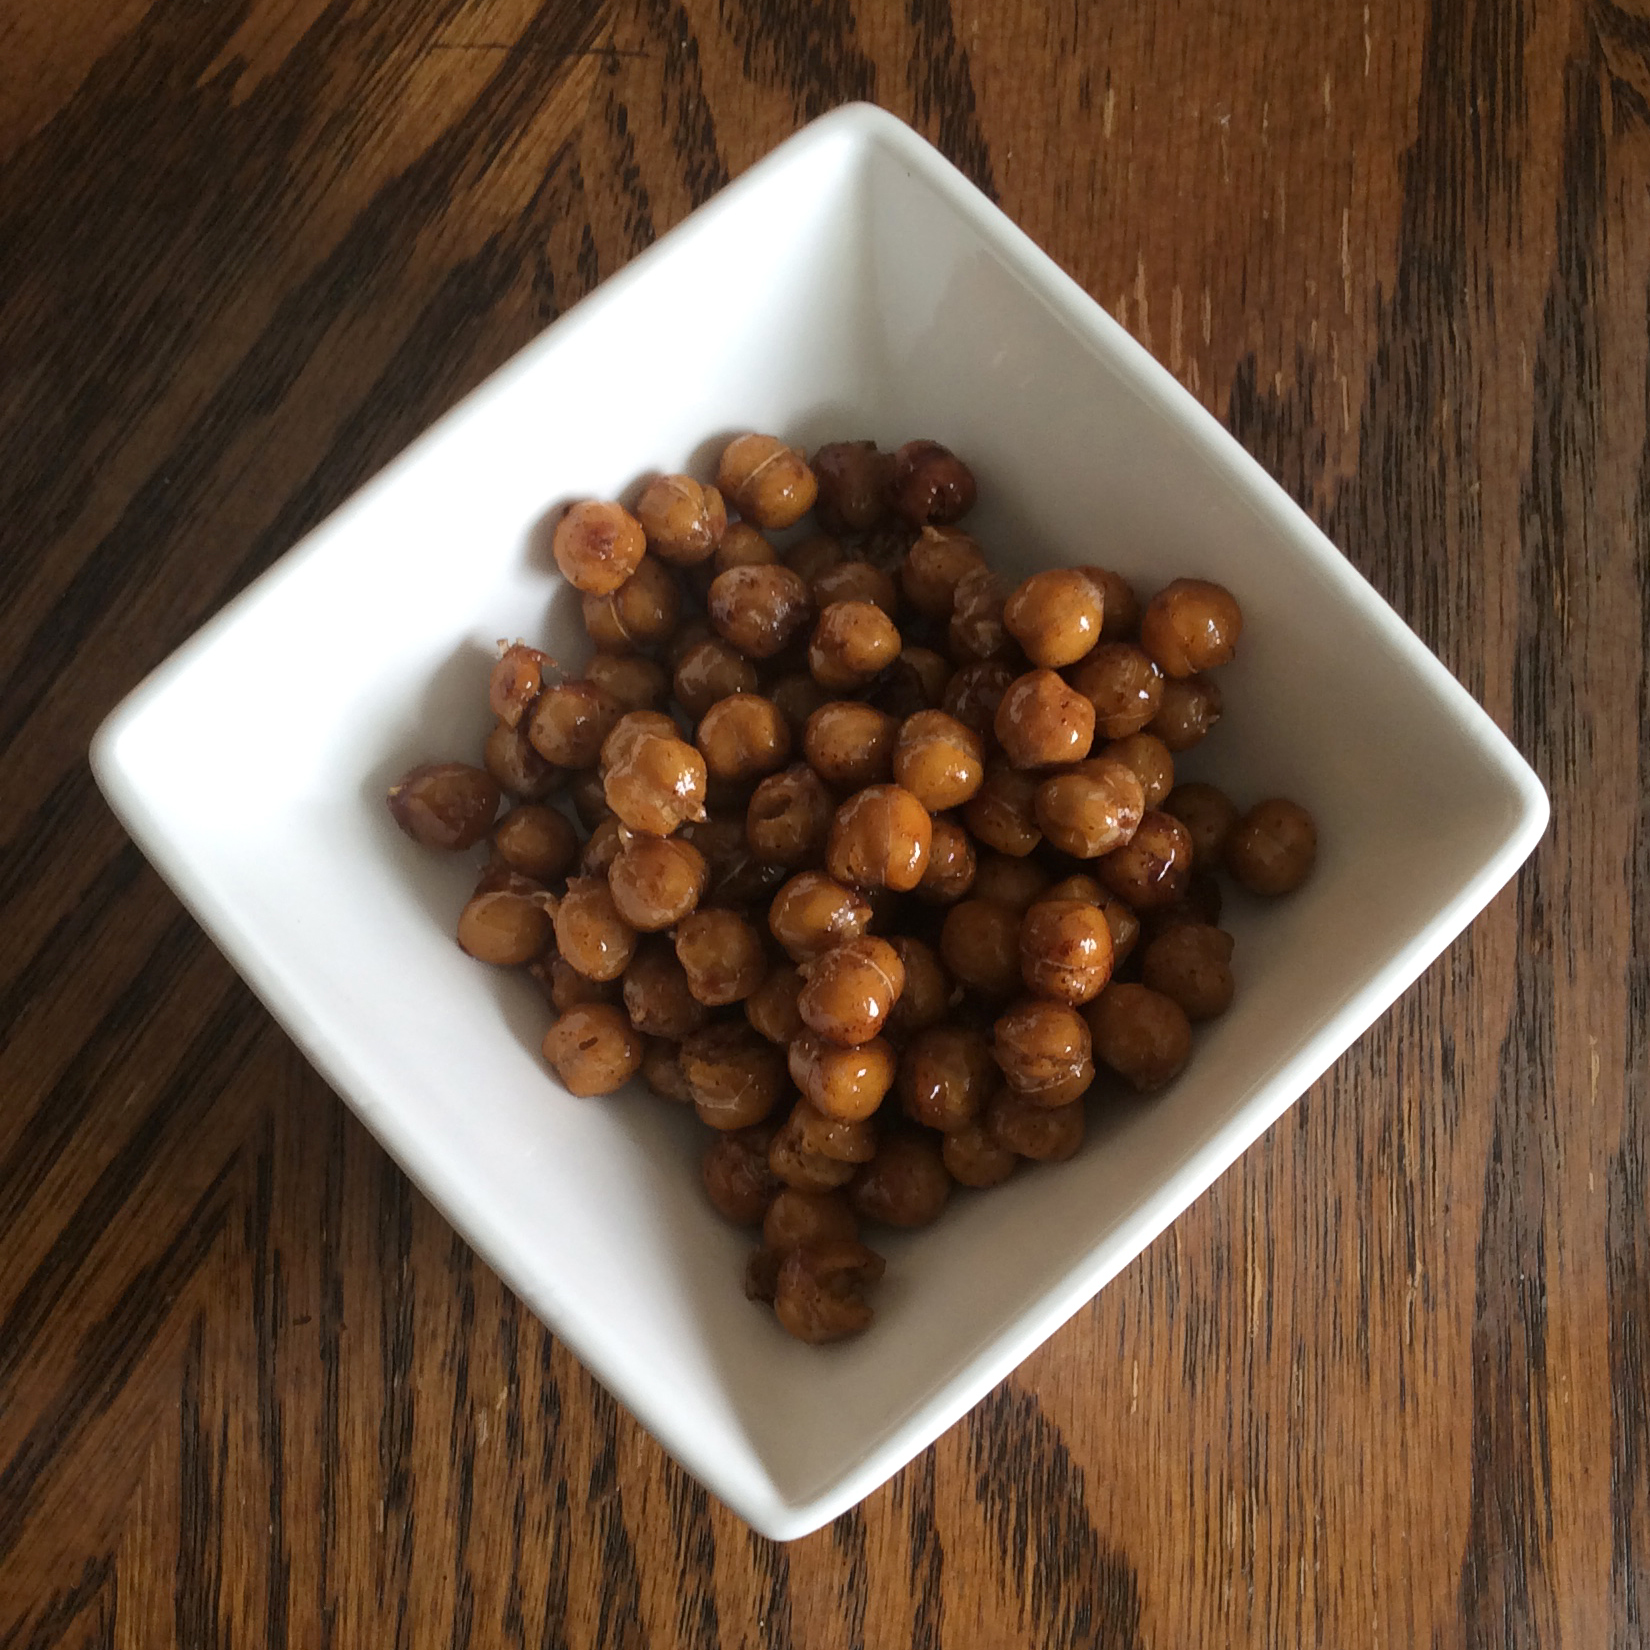 Vegan Maple Cinnamon Roasted Chickpeas are super tasty, easy to make AND healthy!